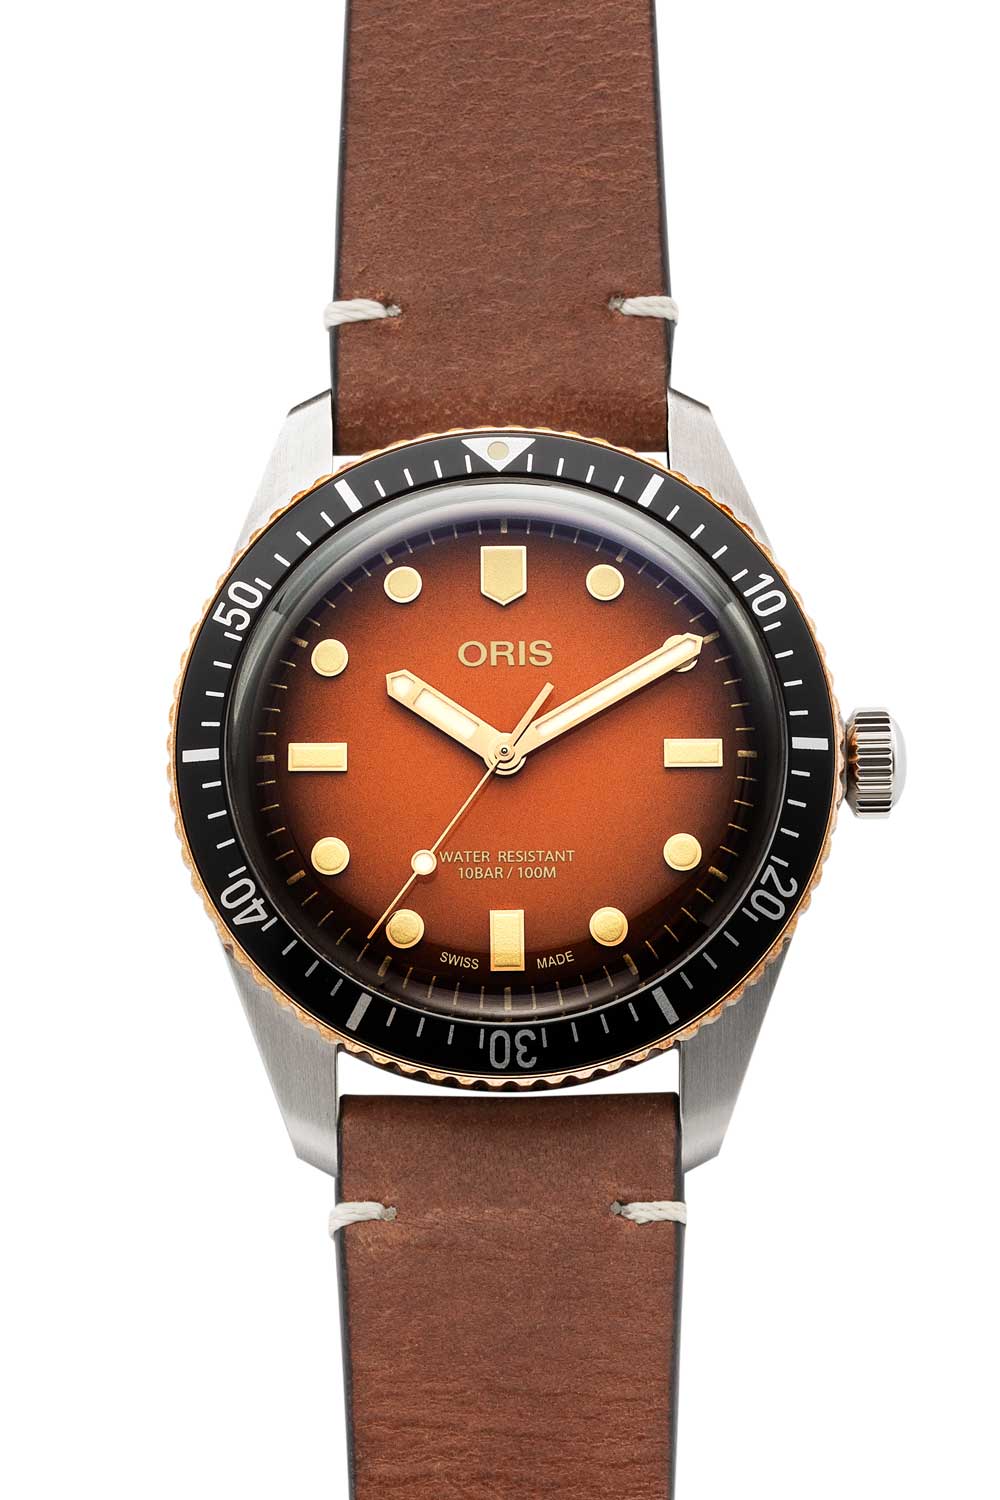 Oris Divers Sixty-Five "Honey" for The Rake and Revolution (Image © Revolution)